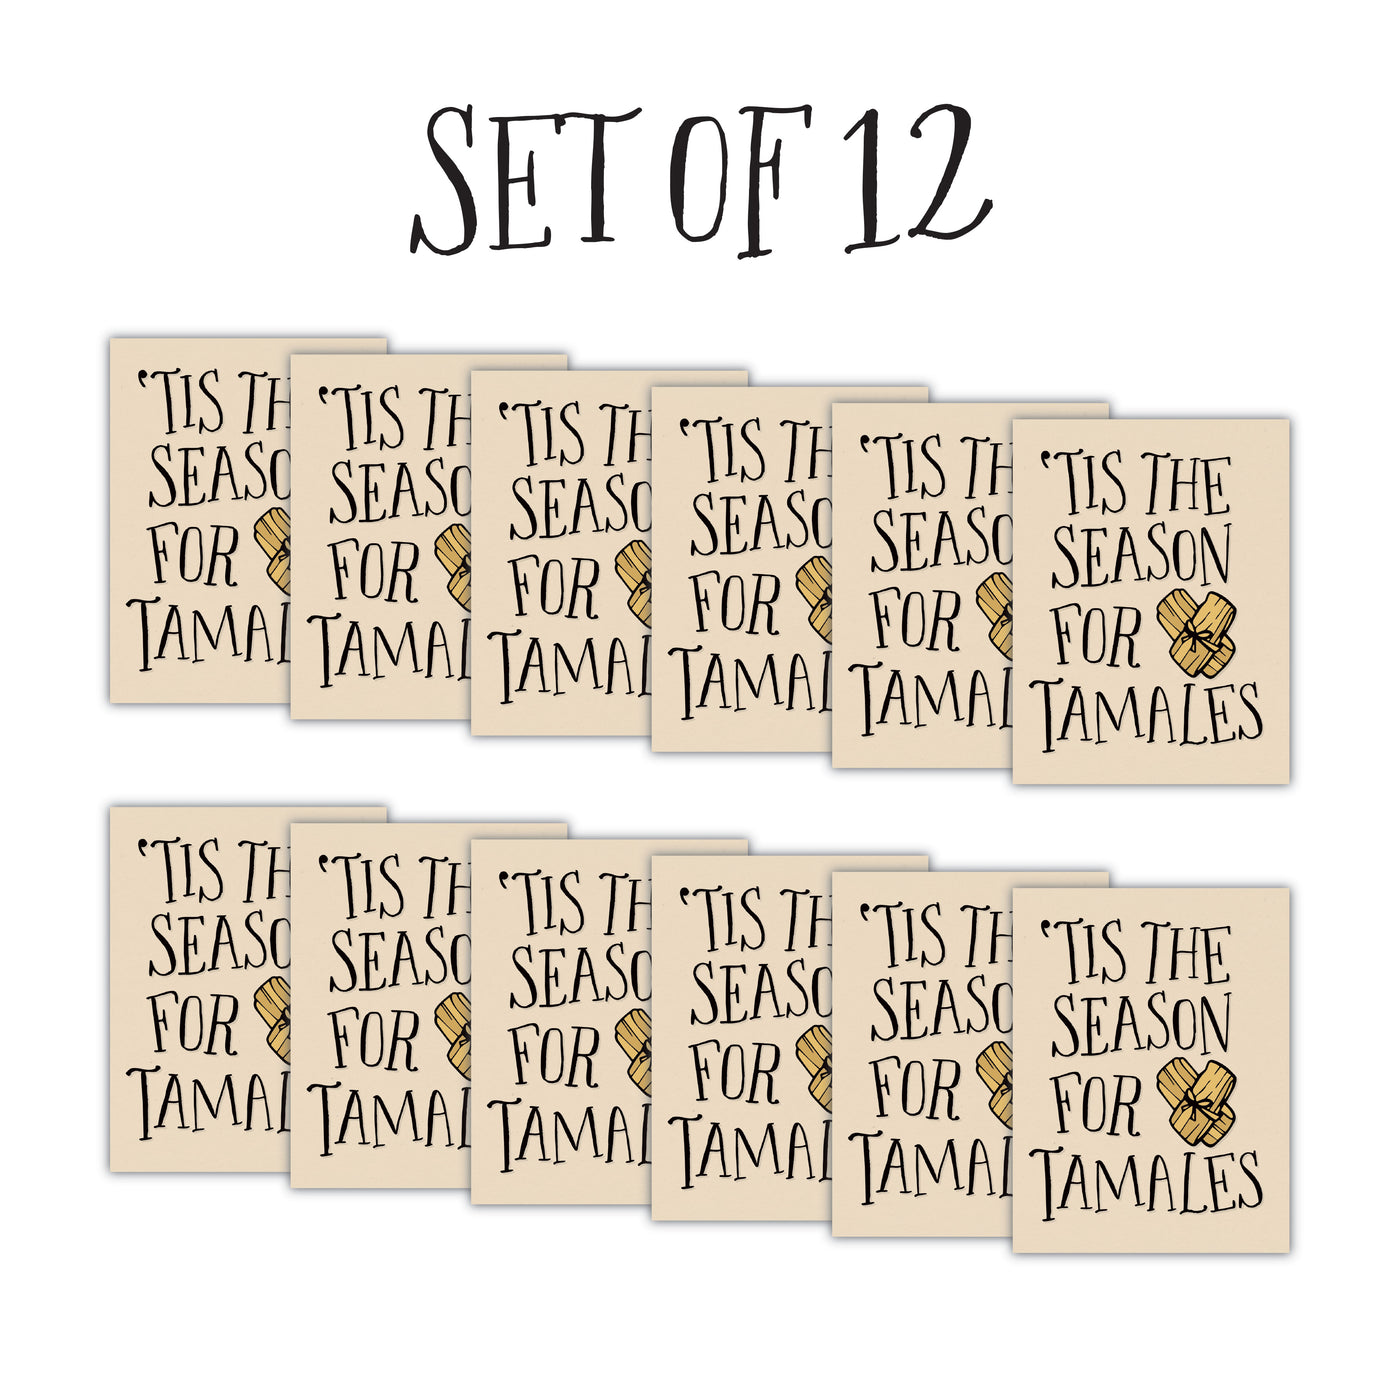 Front of 12 greeting cards with beige background & black text that reads "'Tis The Season For Tamales"